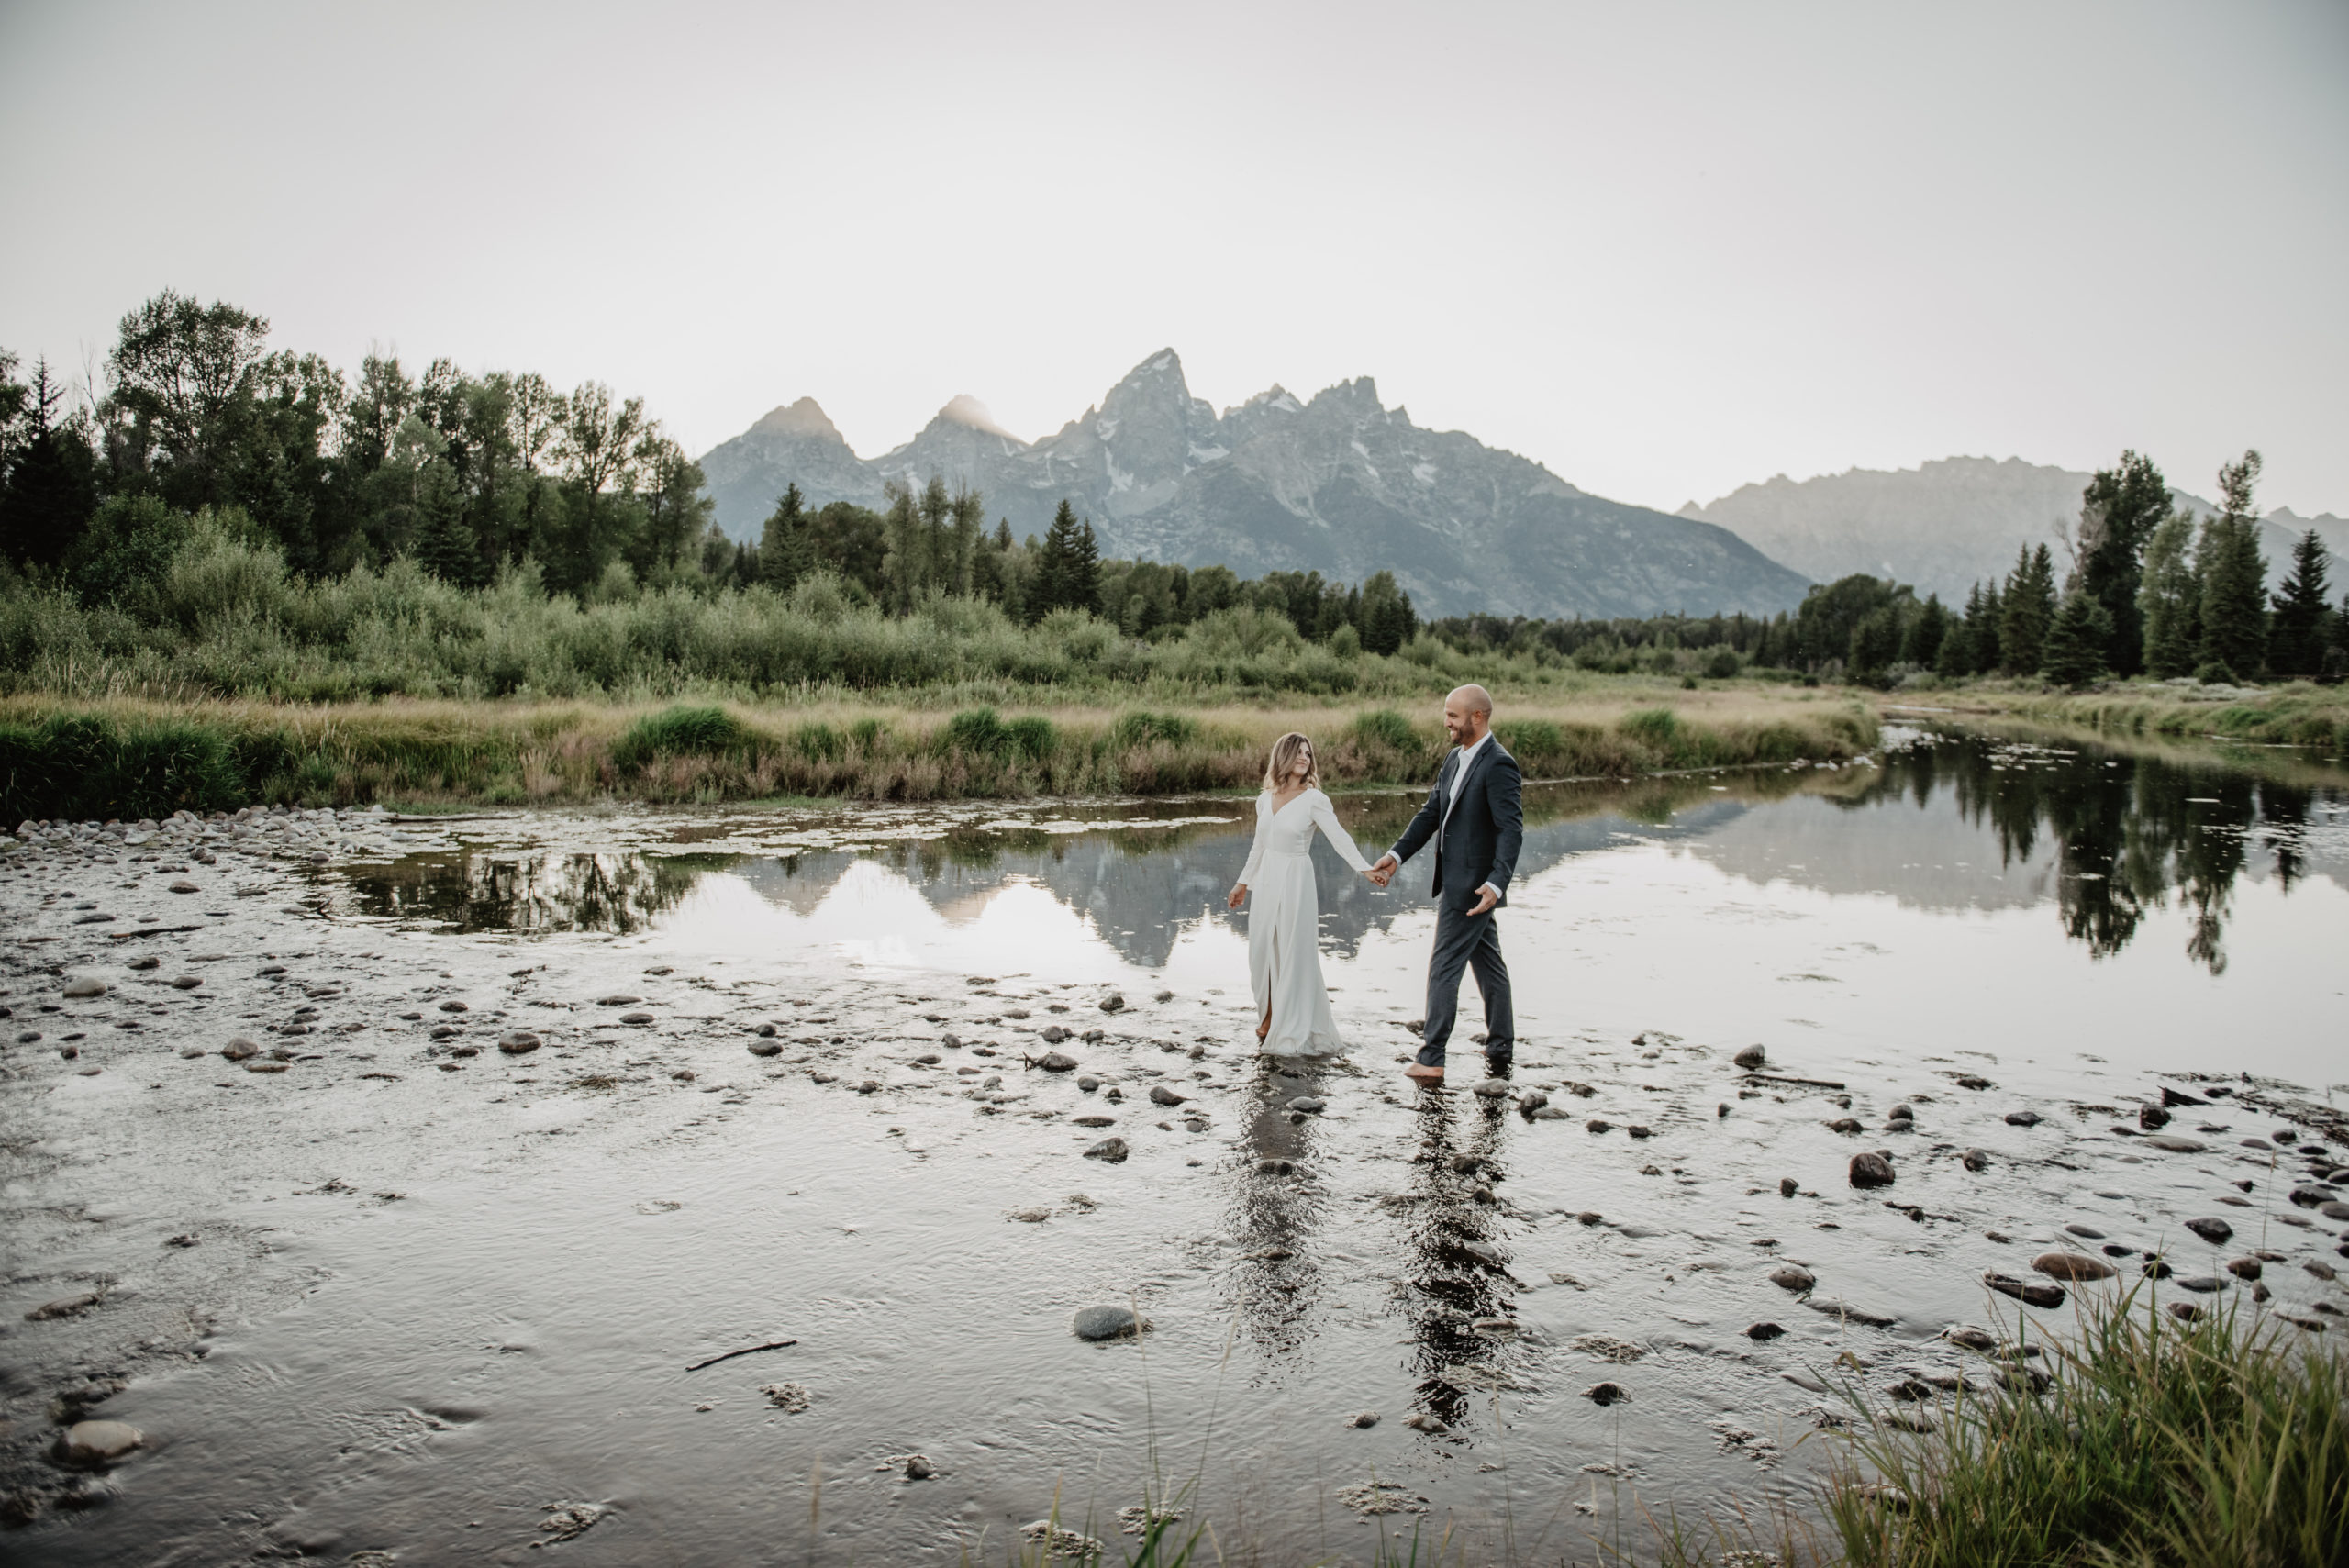 Grand Teton National Park sunset wedding photos with bride and groom holding hands and walking through a river together